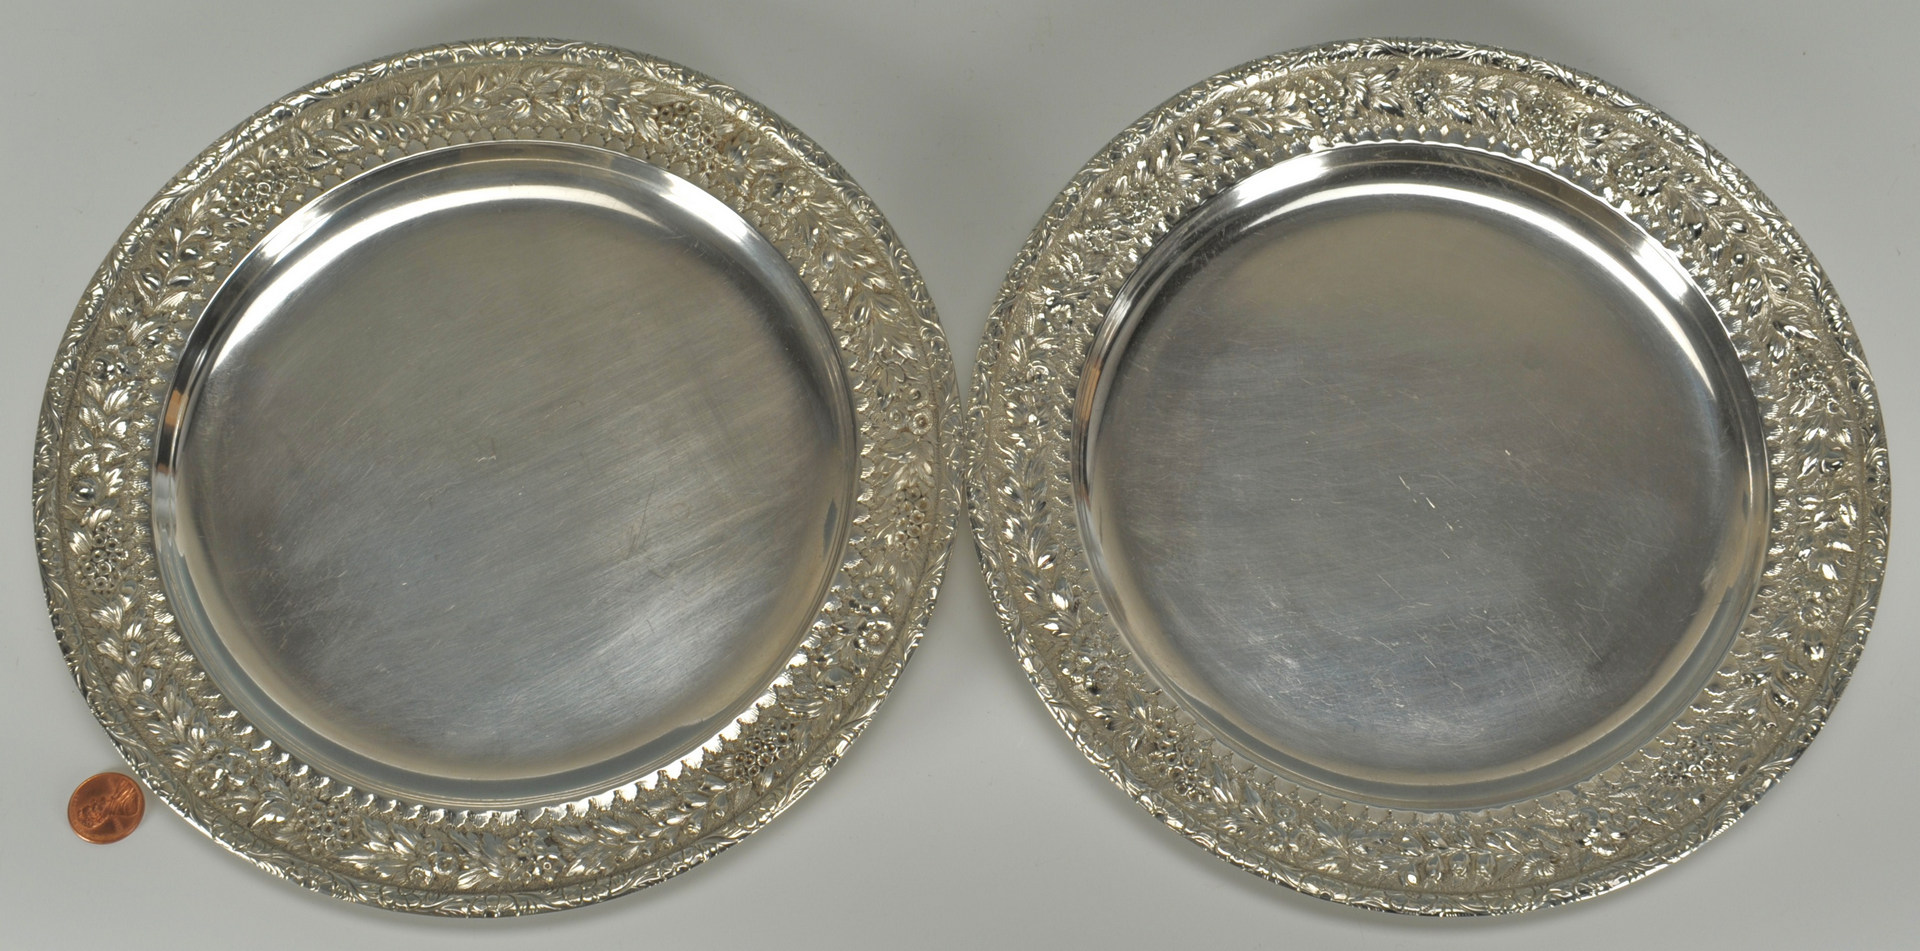 Lot 57: Pair of Tiffany Sterling Plates or Chargers